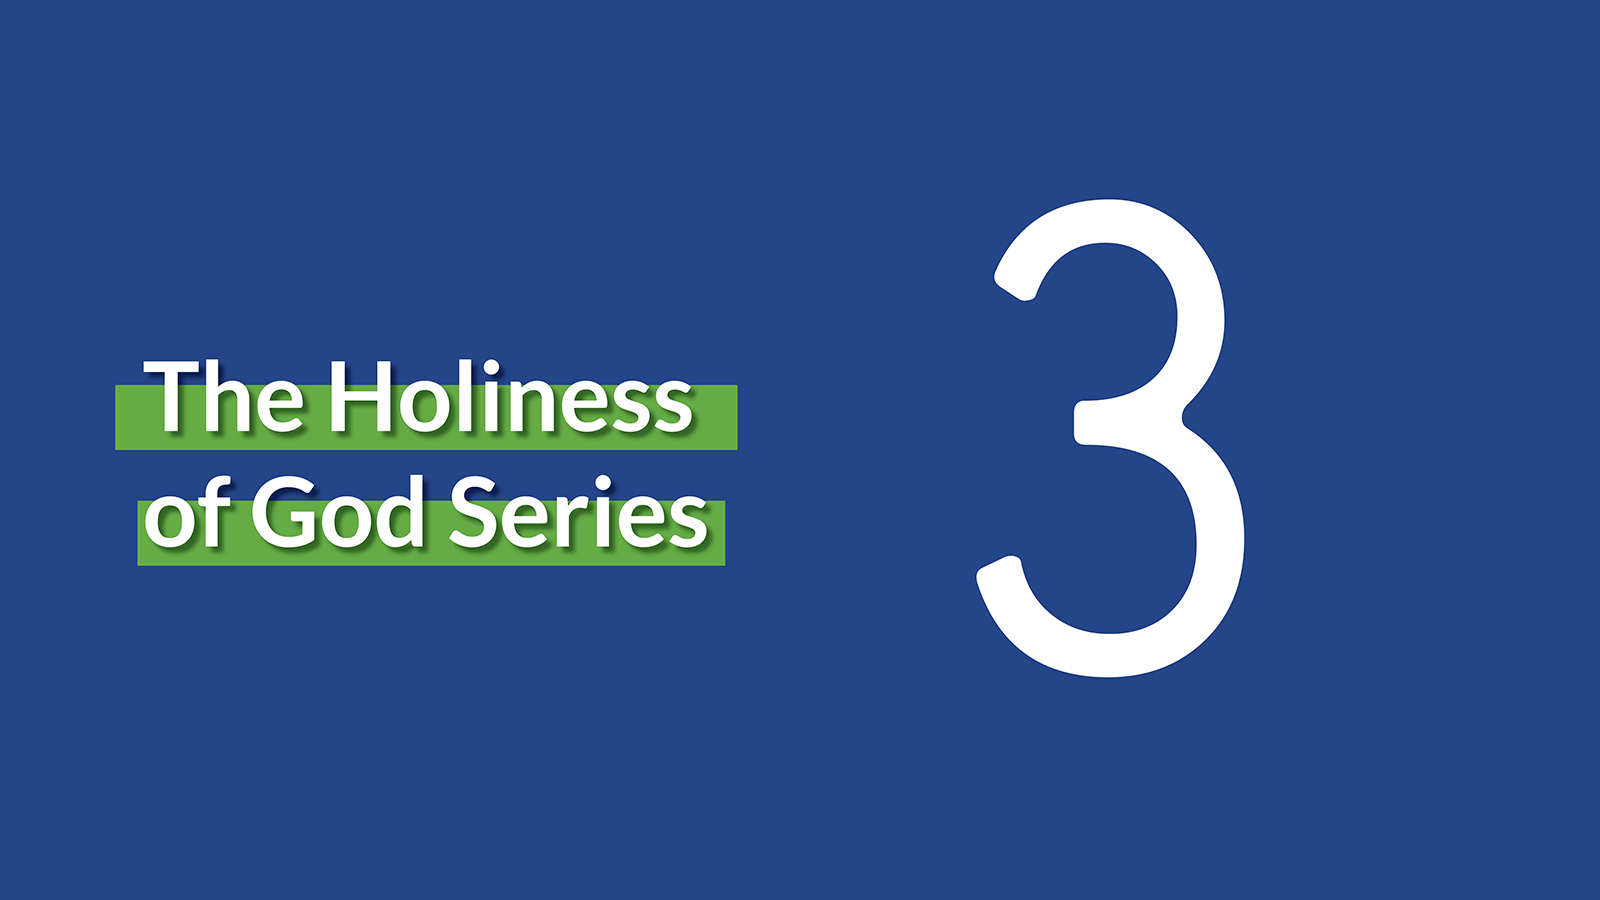 Lesson 3: Holiness and Justice